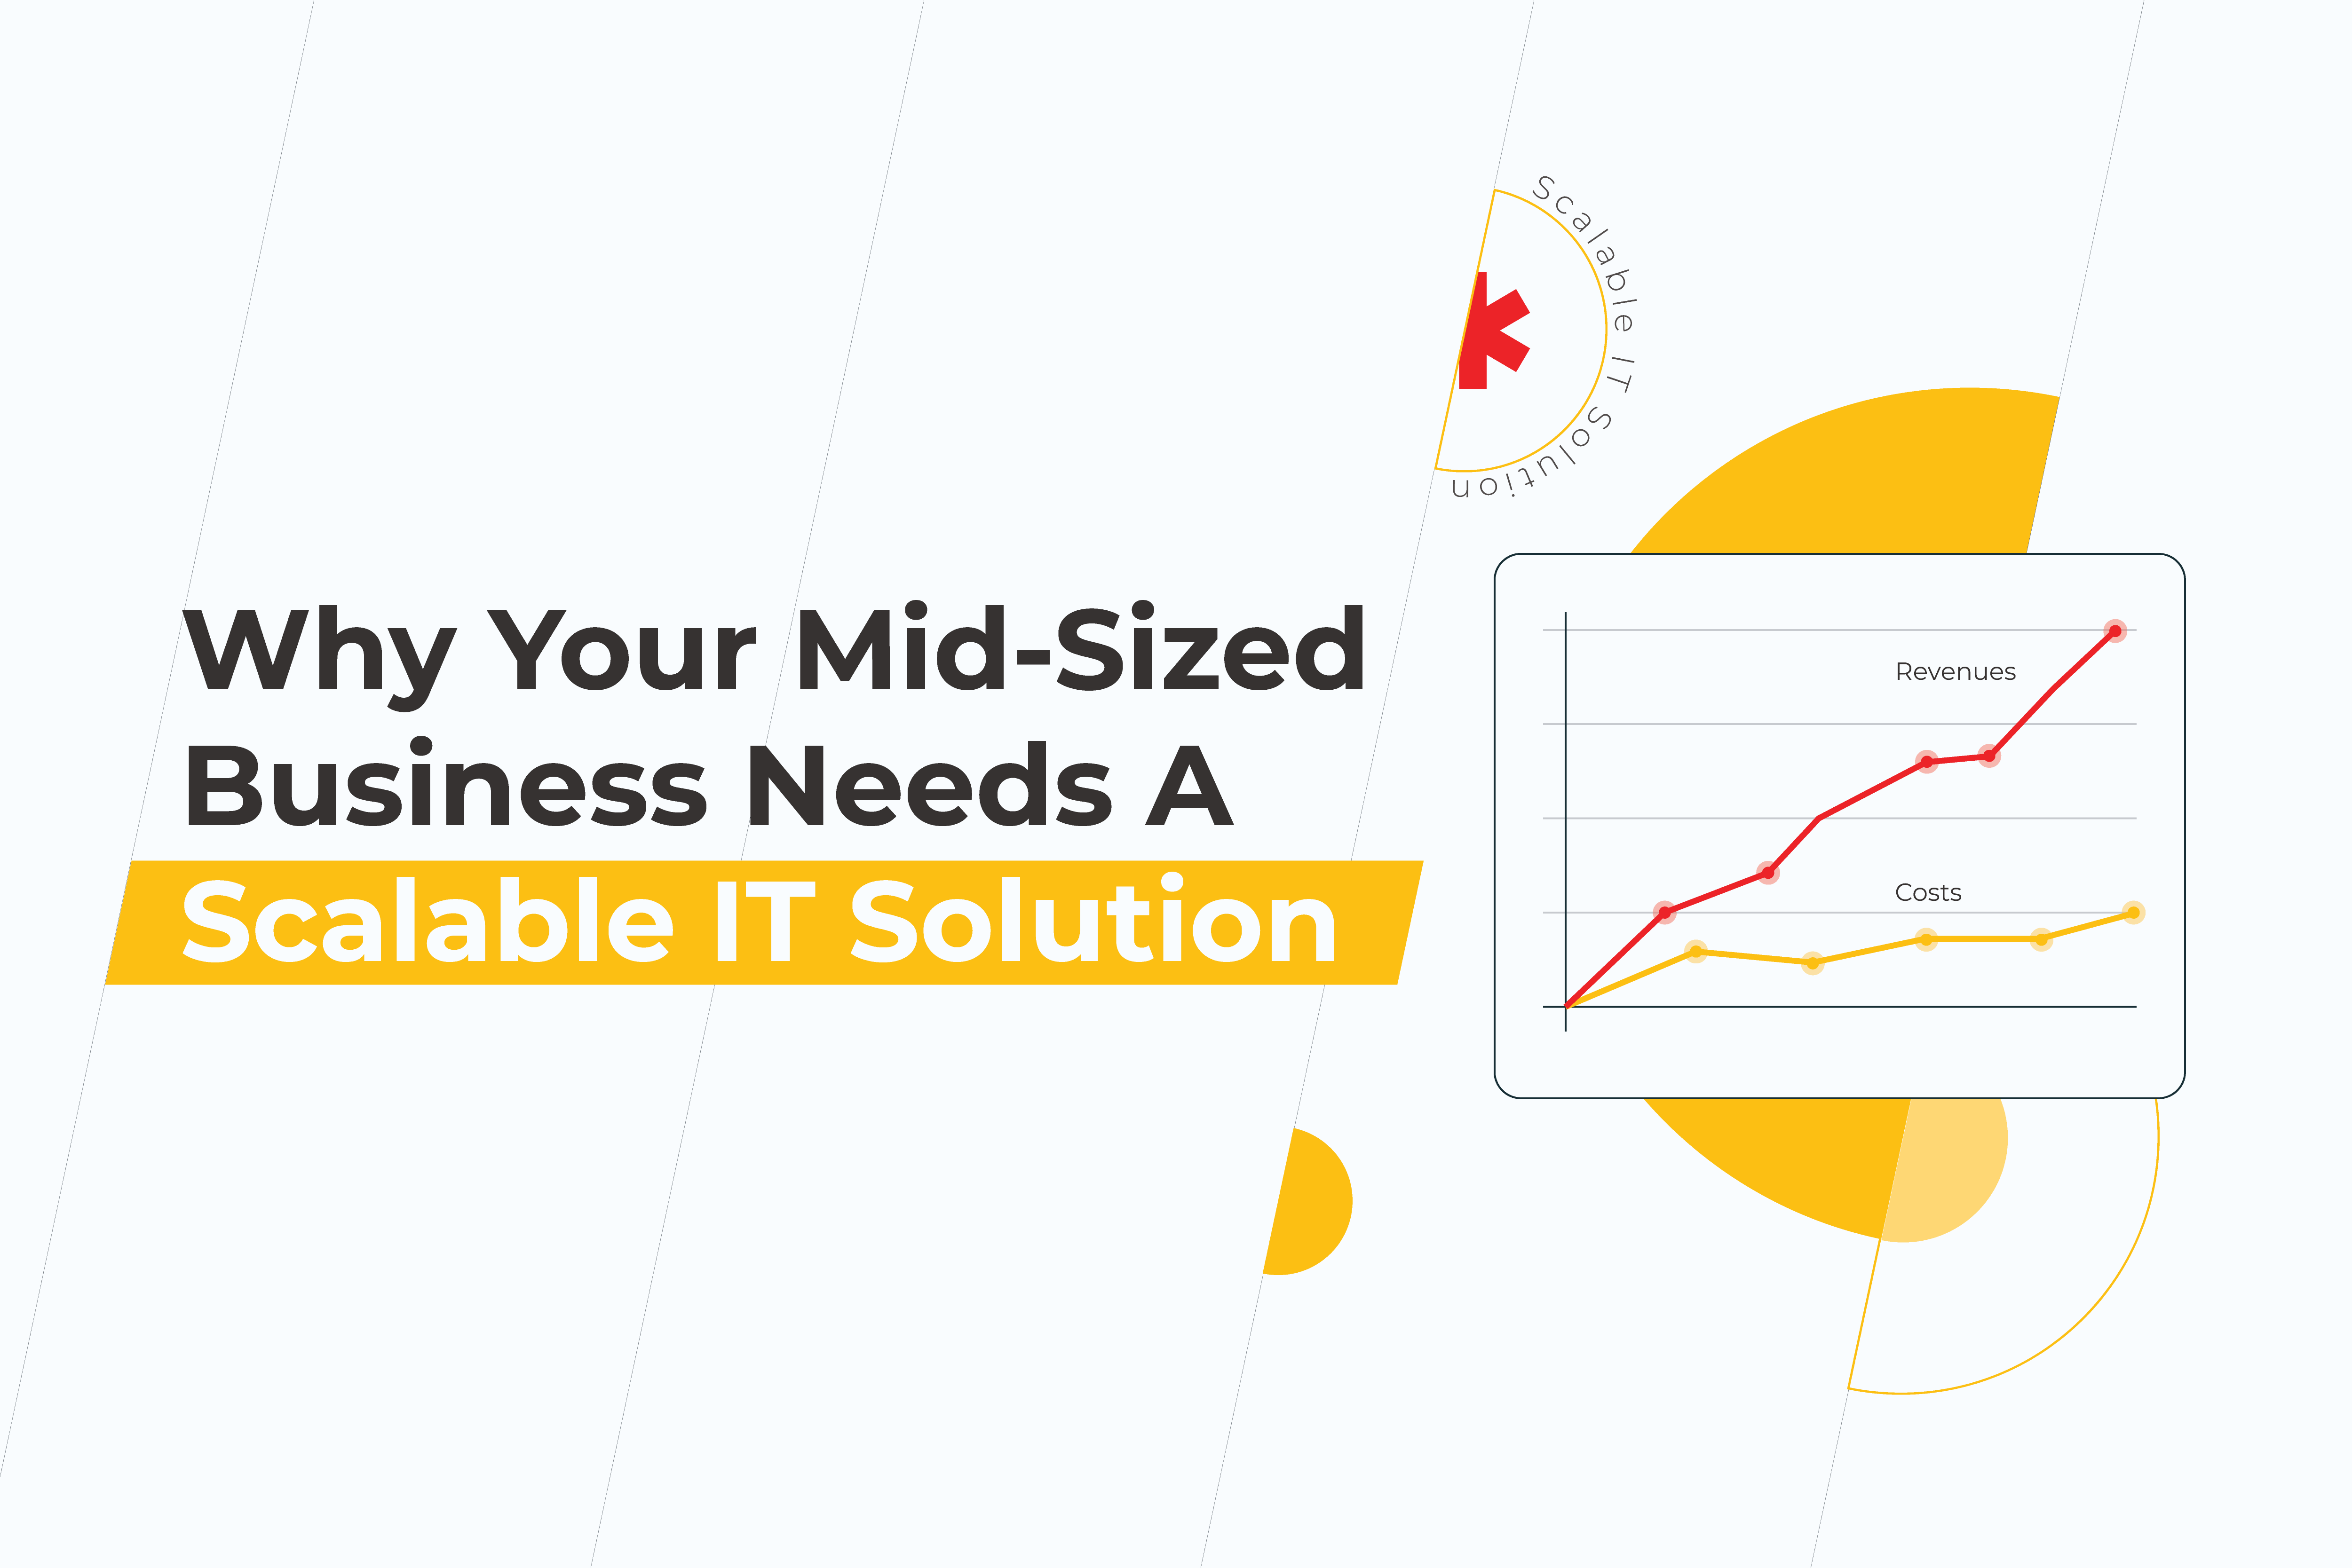 Why Your Mid-Sized Business Needs A Scalable IT Solution